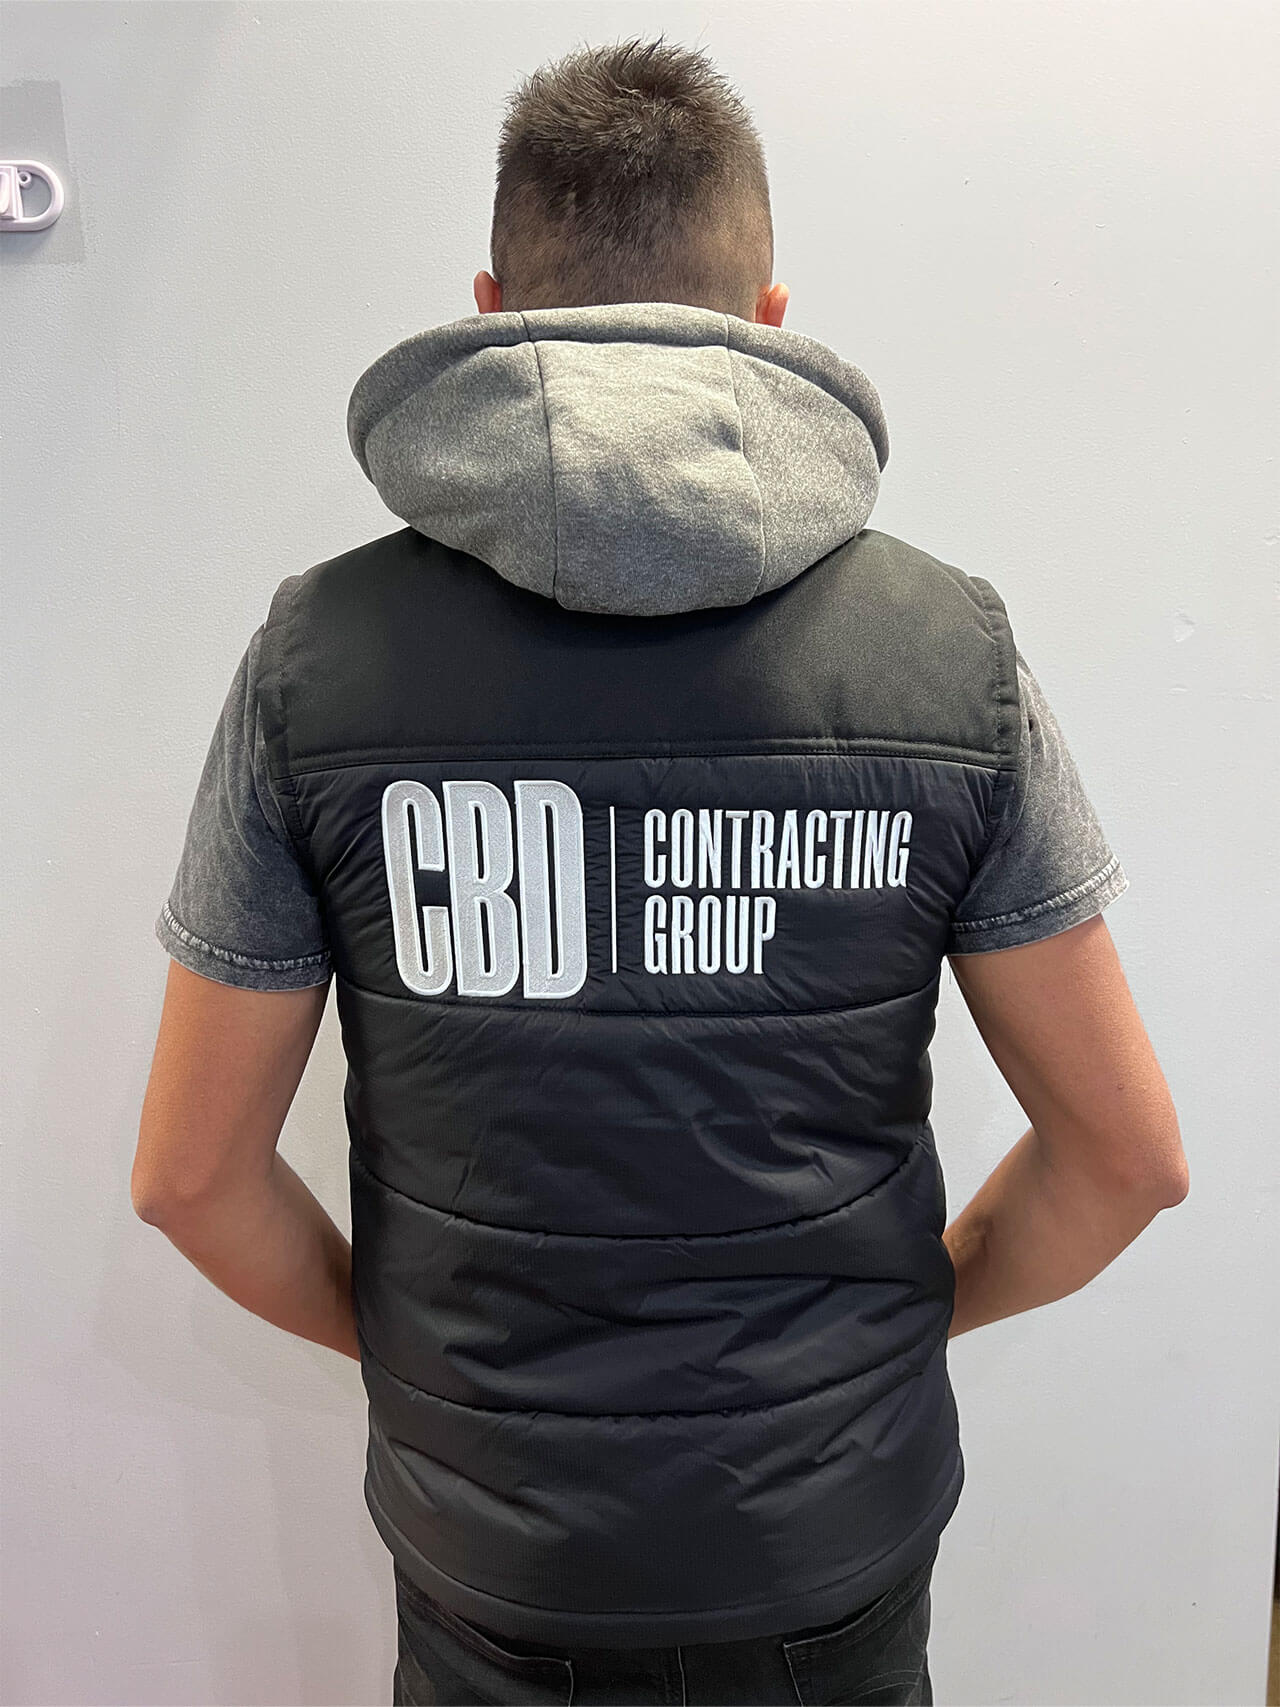 CBD Contracting Group logo embroidery